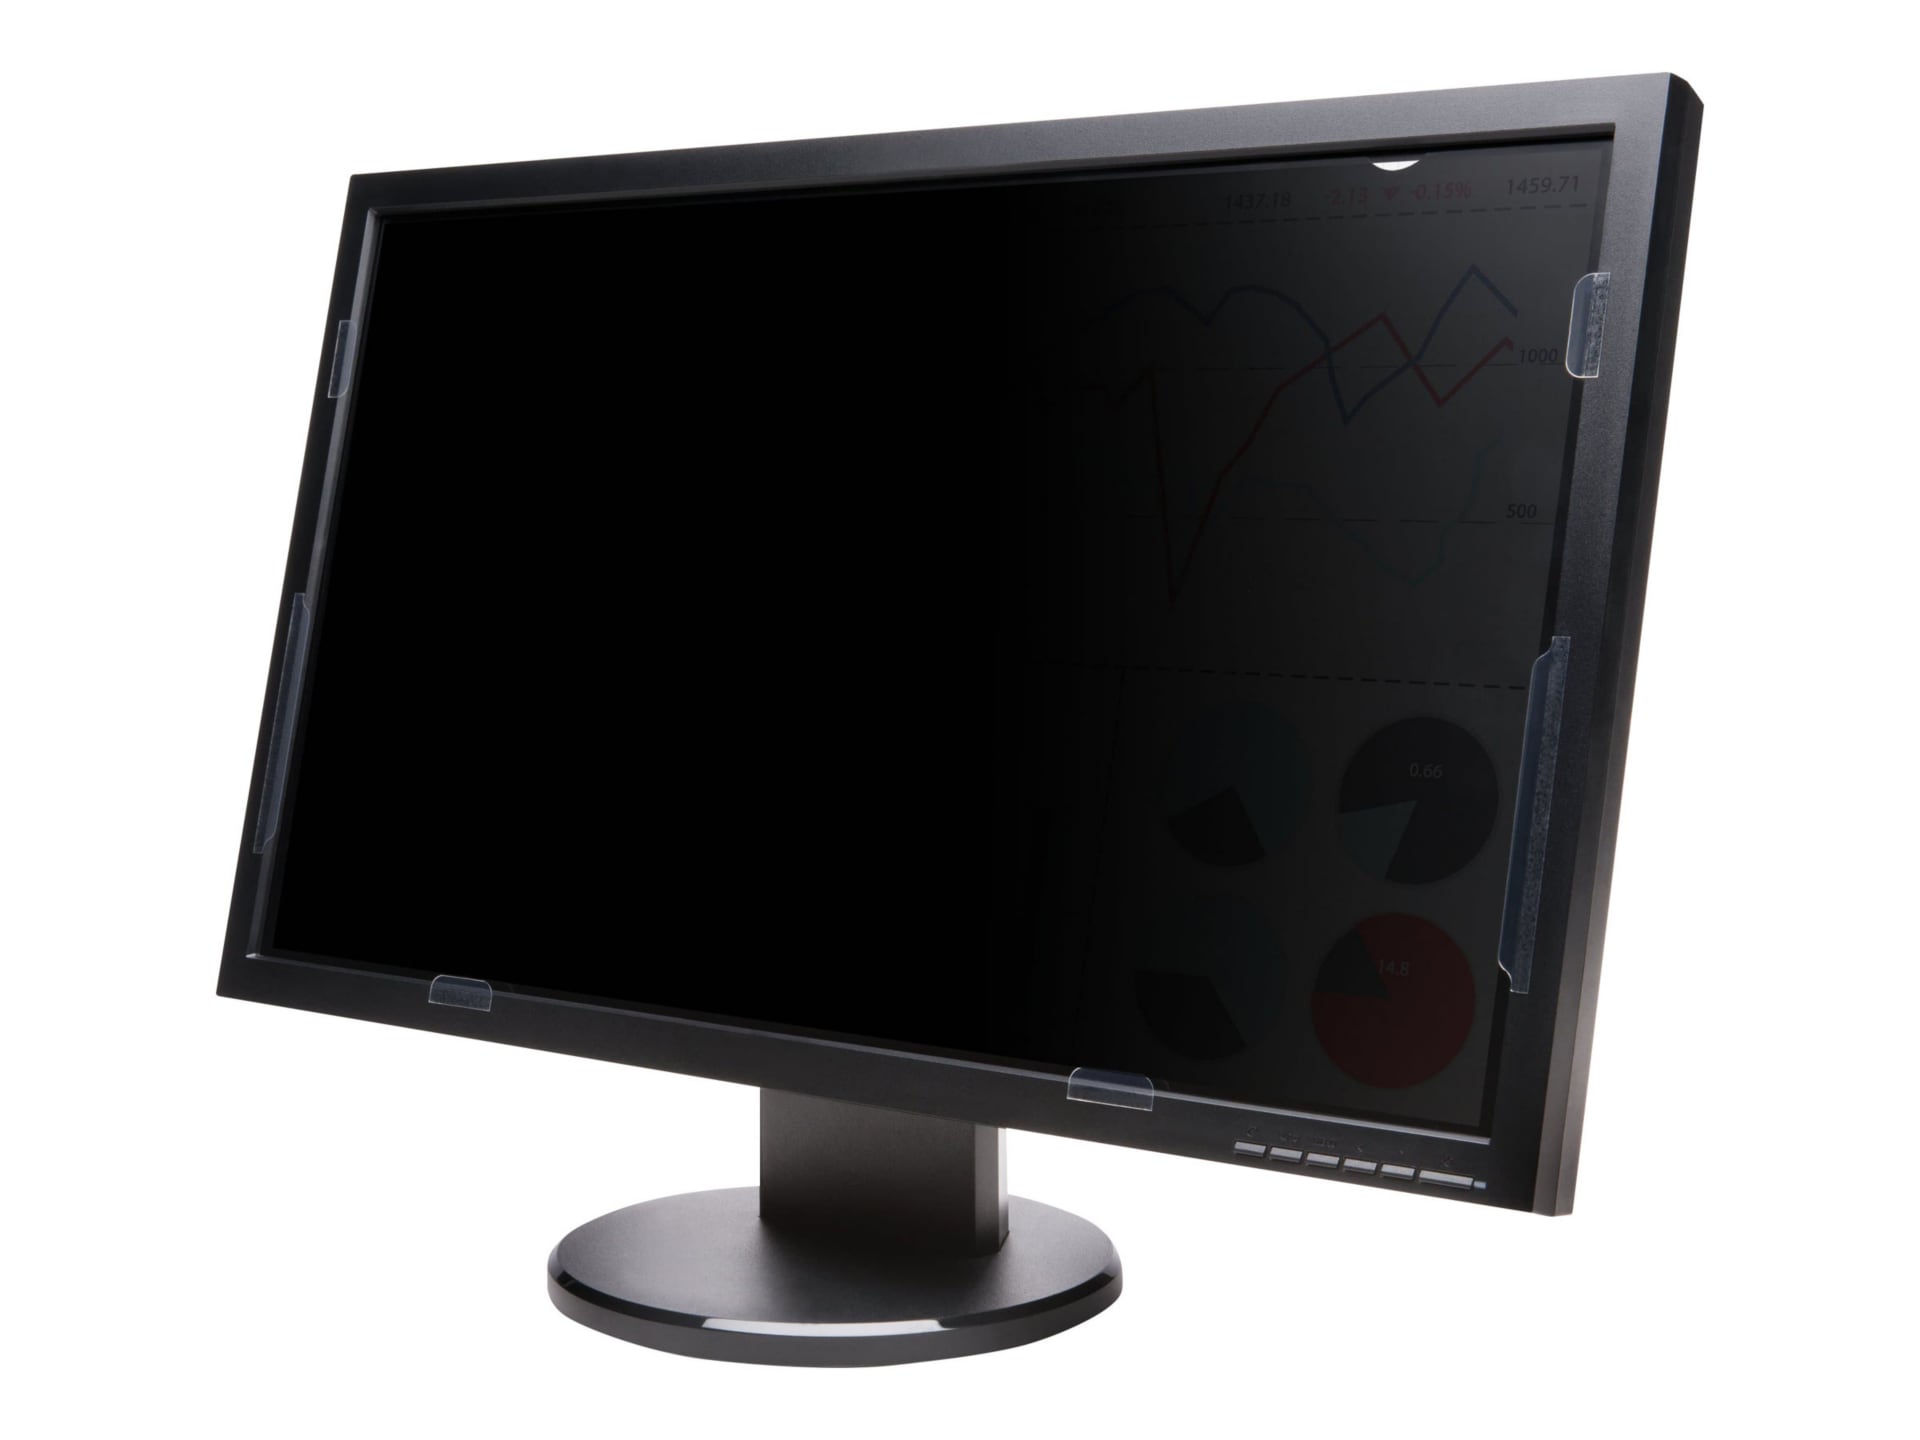 Kensington FP215W9 Privacy Screen for 21.5" Widescreen Monitors - 16:9 - display screen protector - 21.5" wide